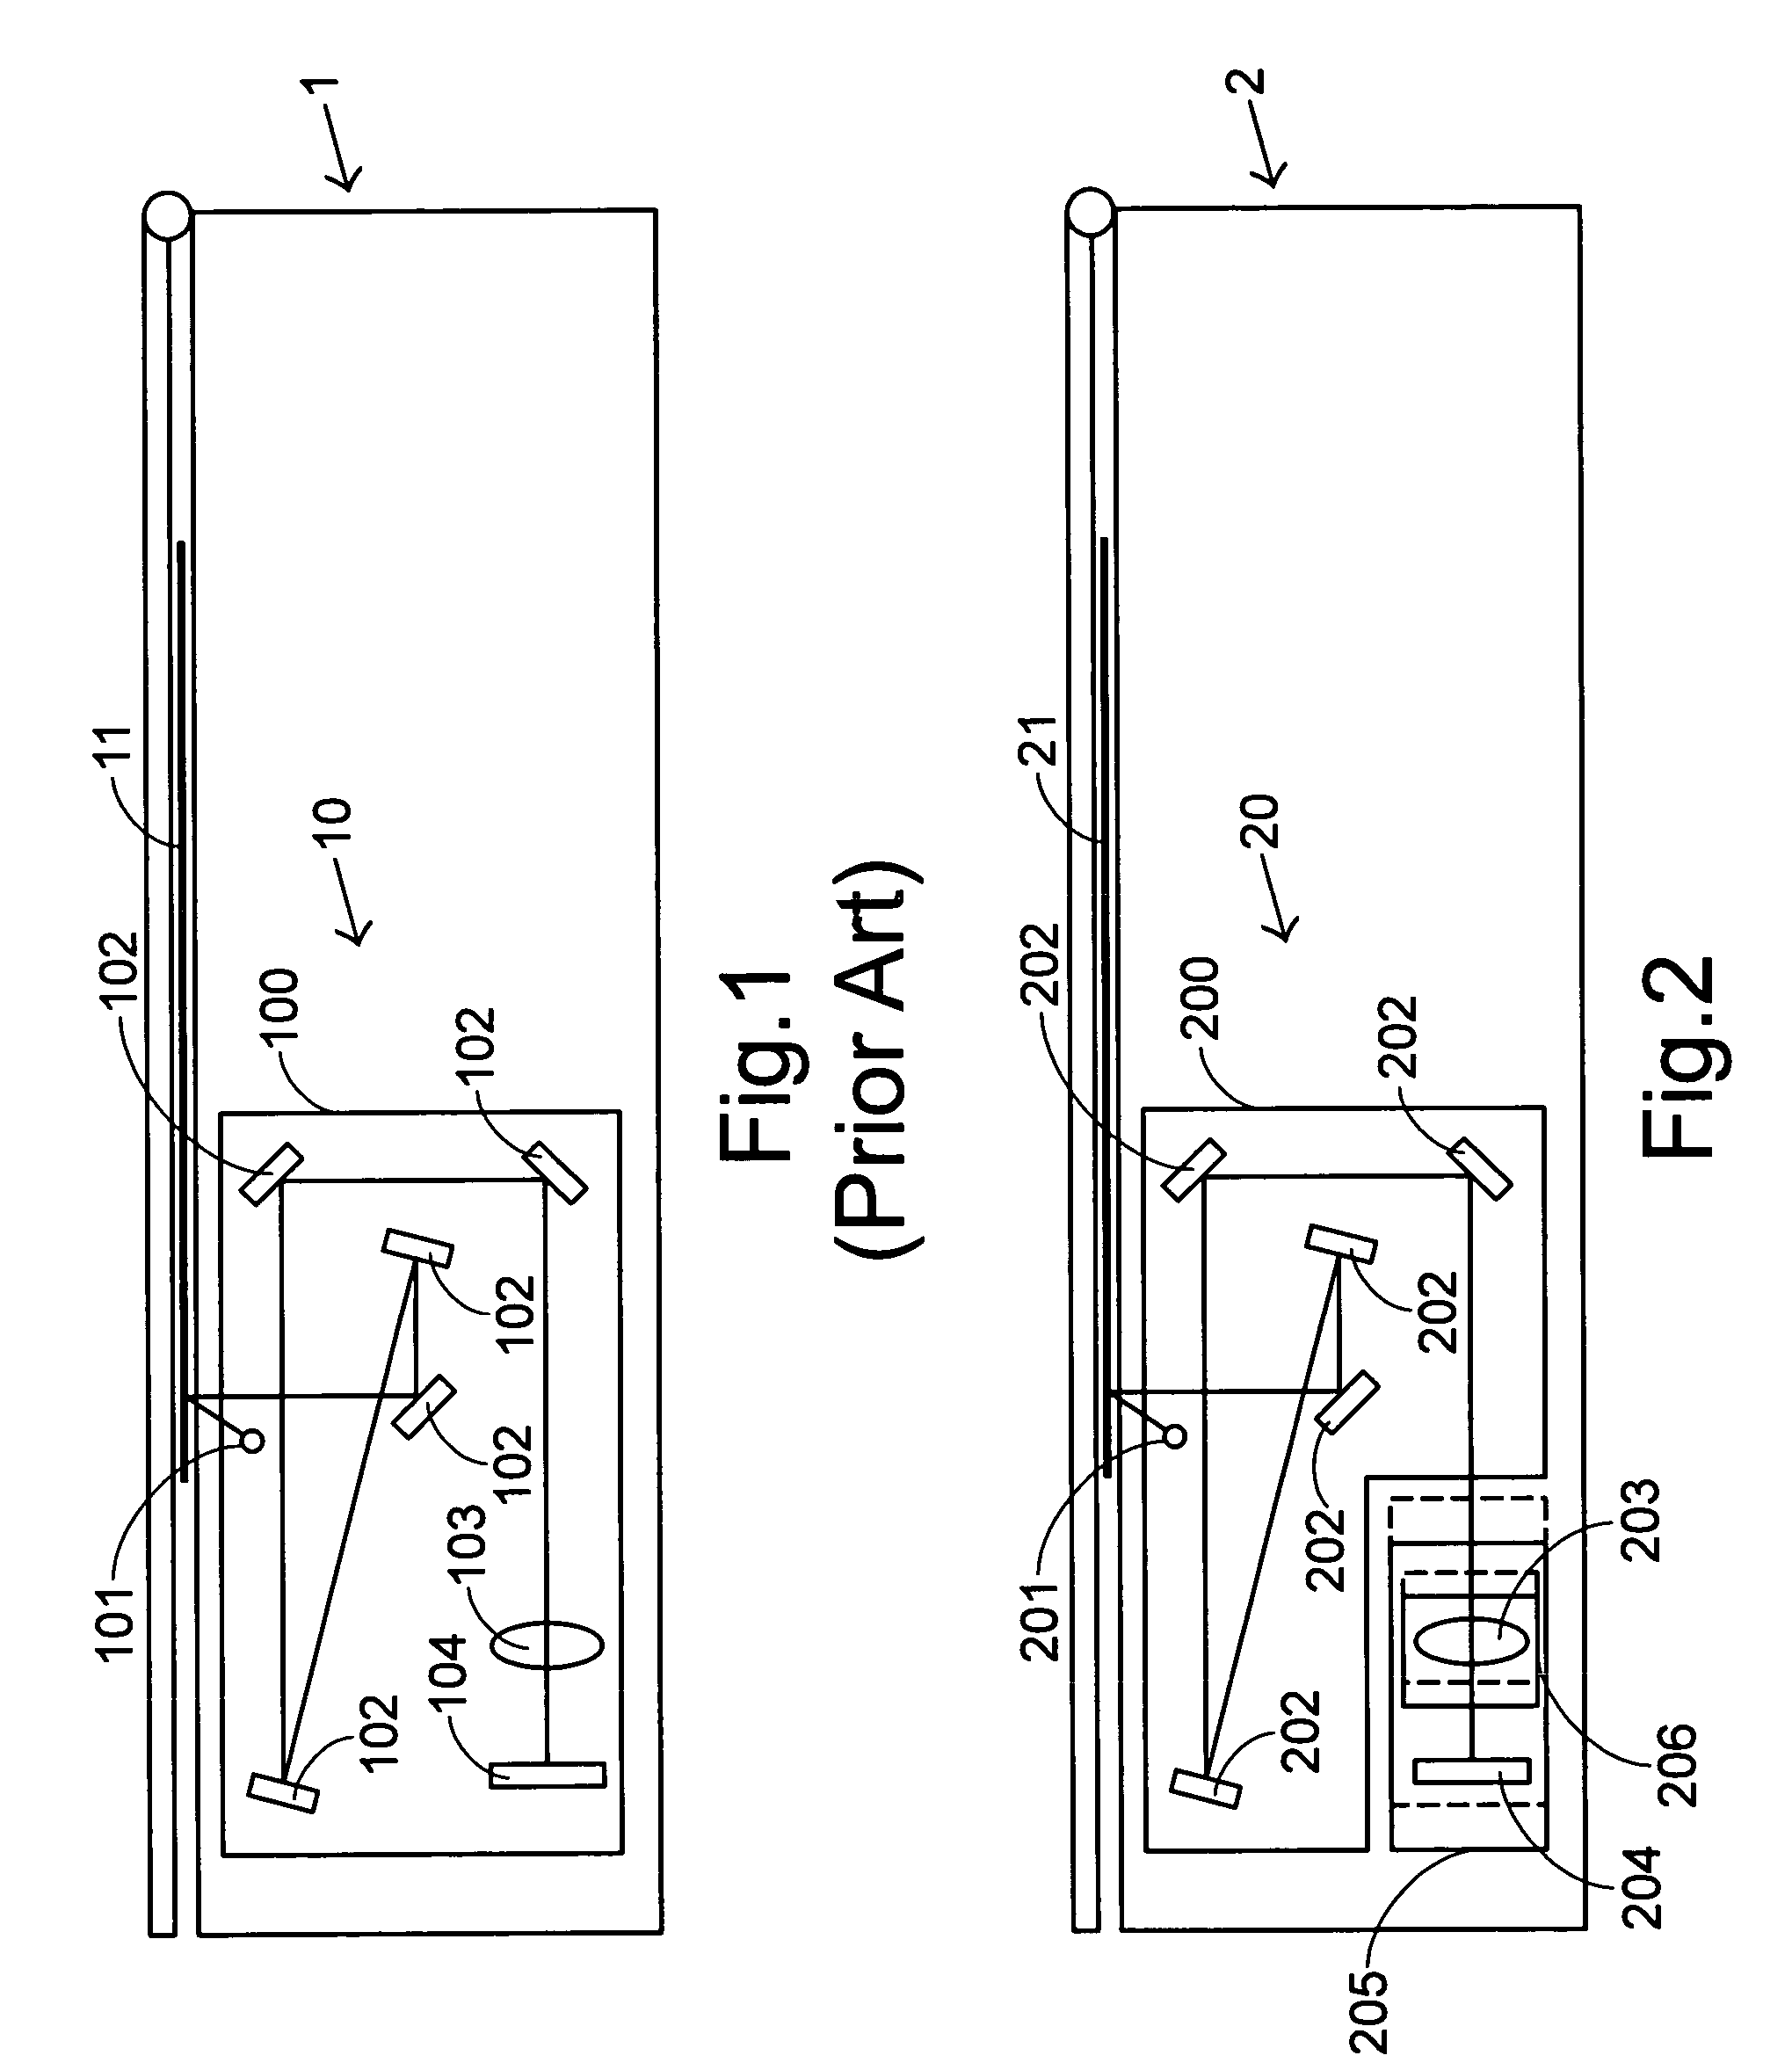 Optical reading head of scanning apparatus